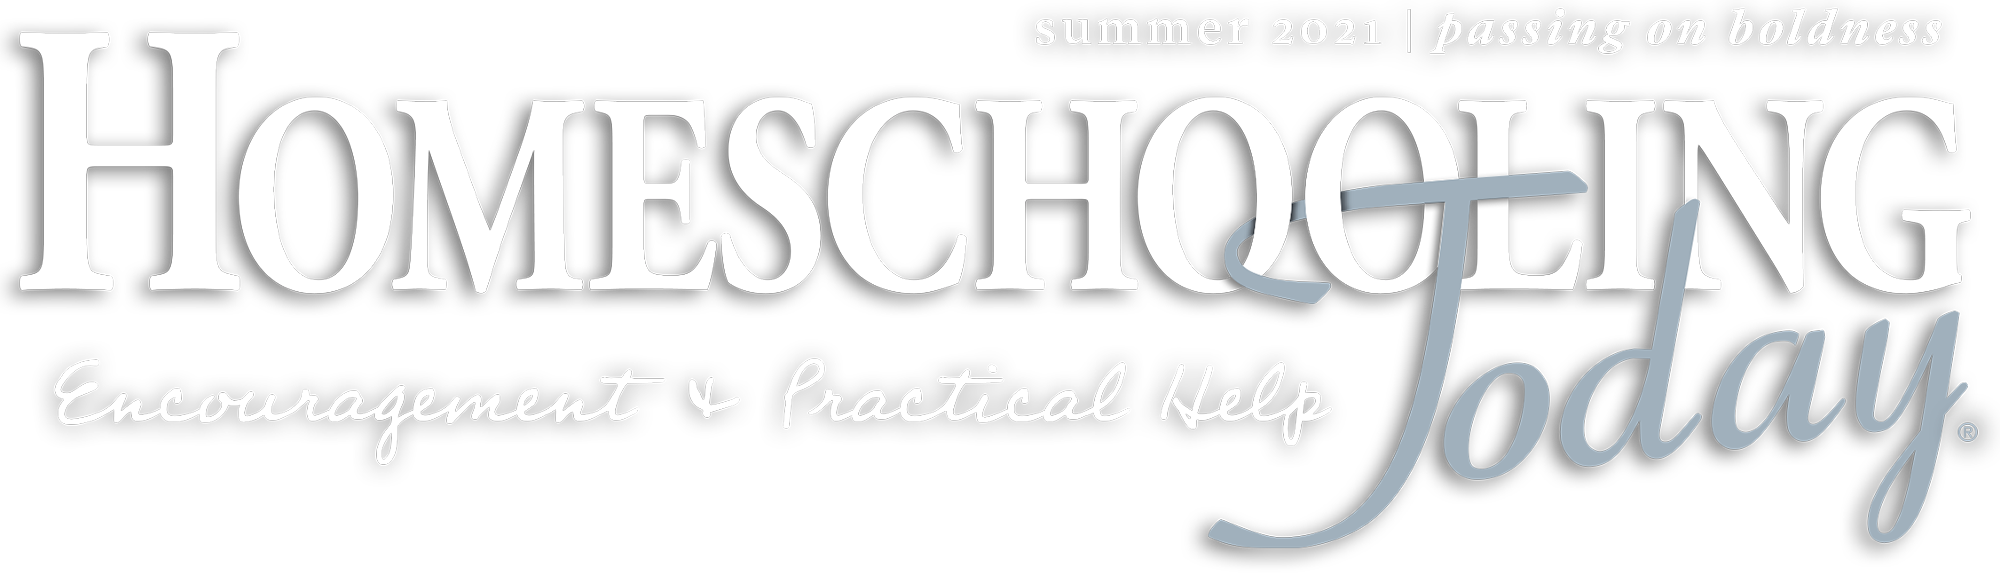 Homeschooling Today Summer 2021 cover logo in white and brown